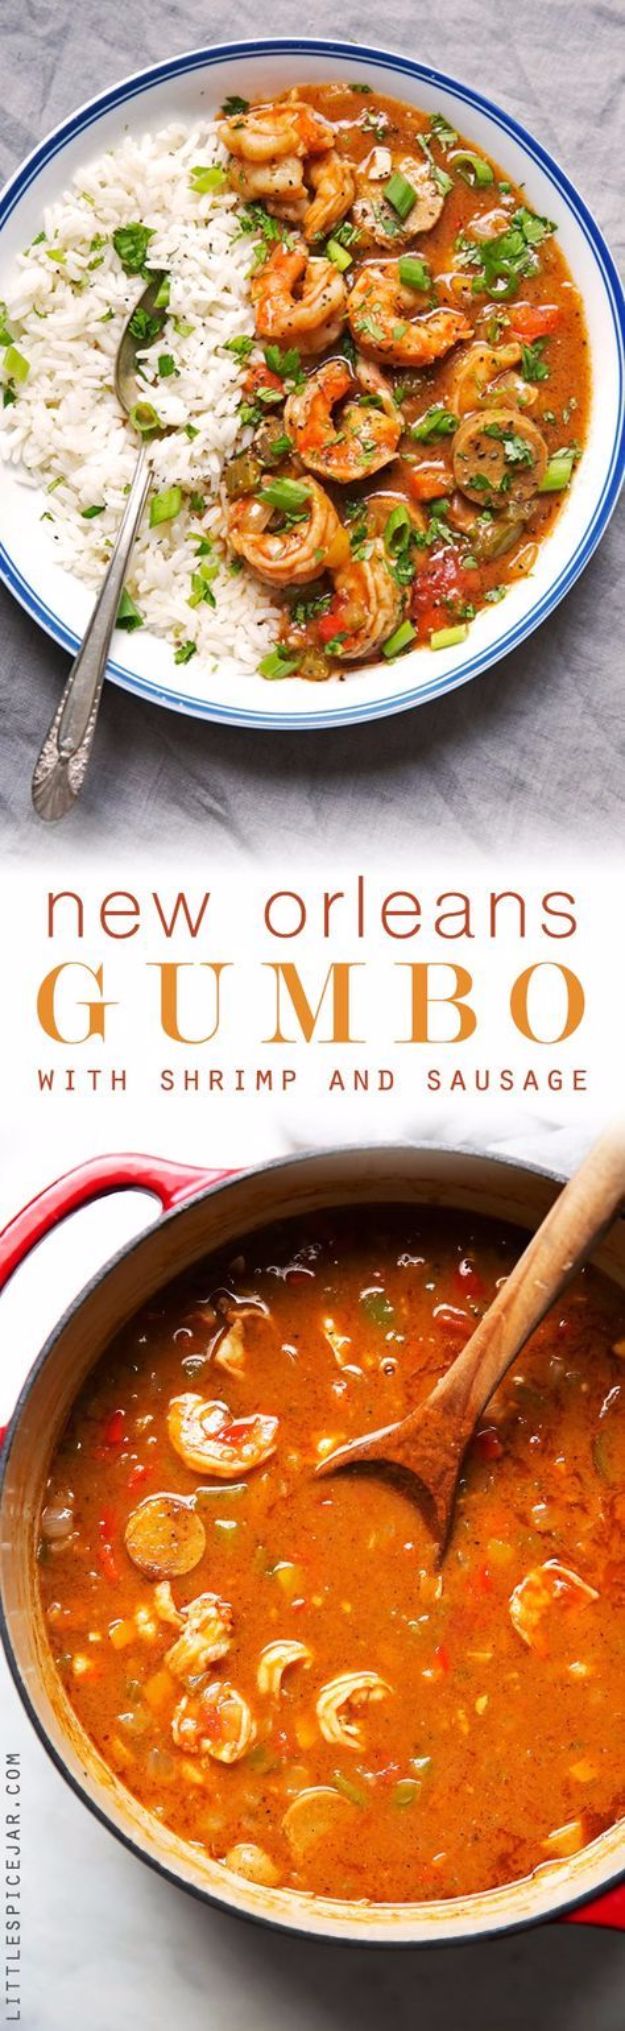 Best Country Cooking Recipes - New Orleans Gumbo Shrimp With Sausage - Easy Recipes for Country Food Like Chicken Fried Steak, Fried Green Tomatoes, Southern Gravy, Breads and Biscuits, Casseroles and More - Breakfast, Lunch and Dinner Recipe Ideas for Families and Feeding A Crowd - Step by Step Instructions for Making Homestyle Dips, Snacks, Desserts #recipes